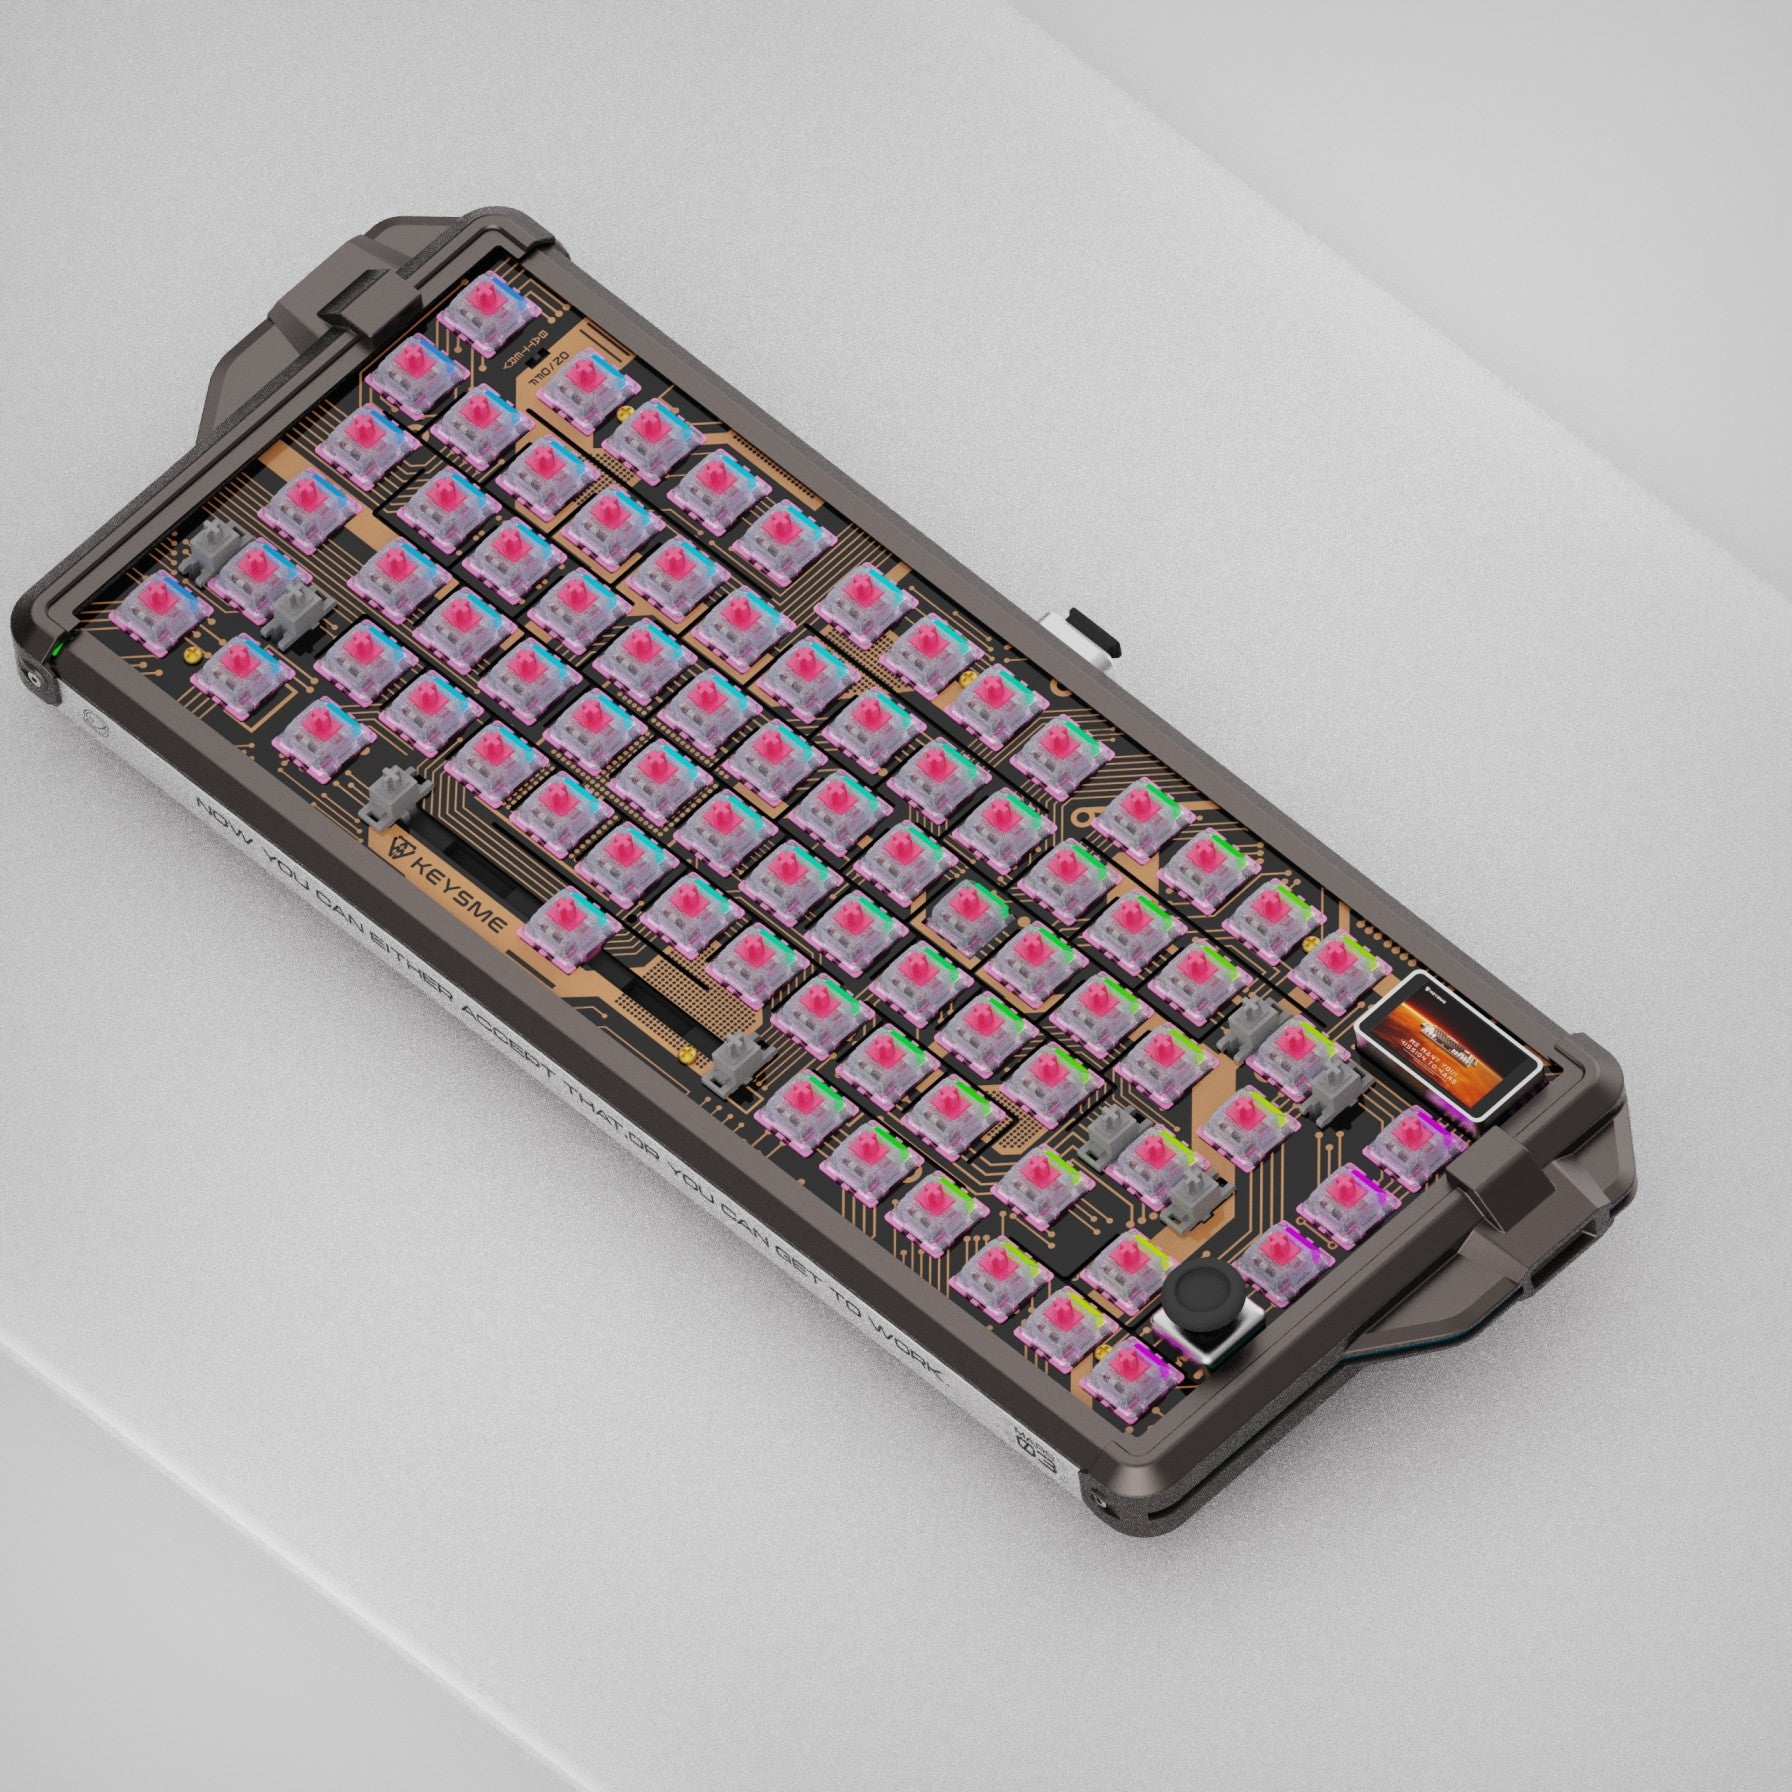 KeysMe Mars 03 spaceship mechanical keyboard hot-swappable Gateron Weightlessness switch for Windows Mac Black Knight color